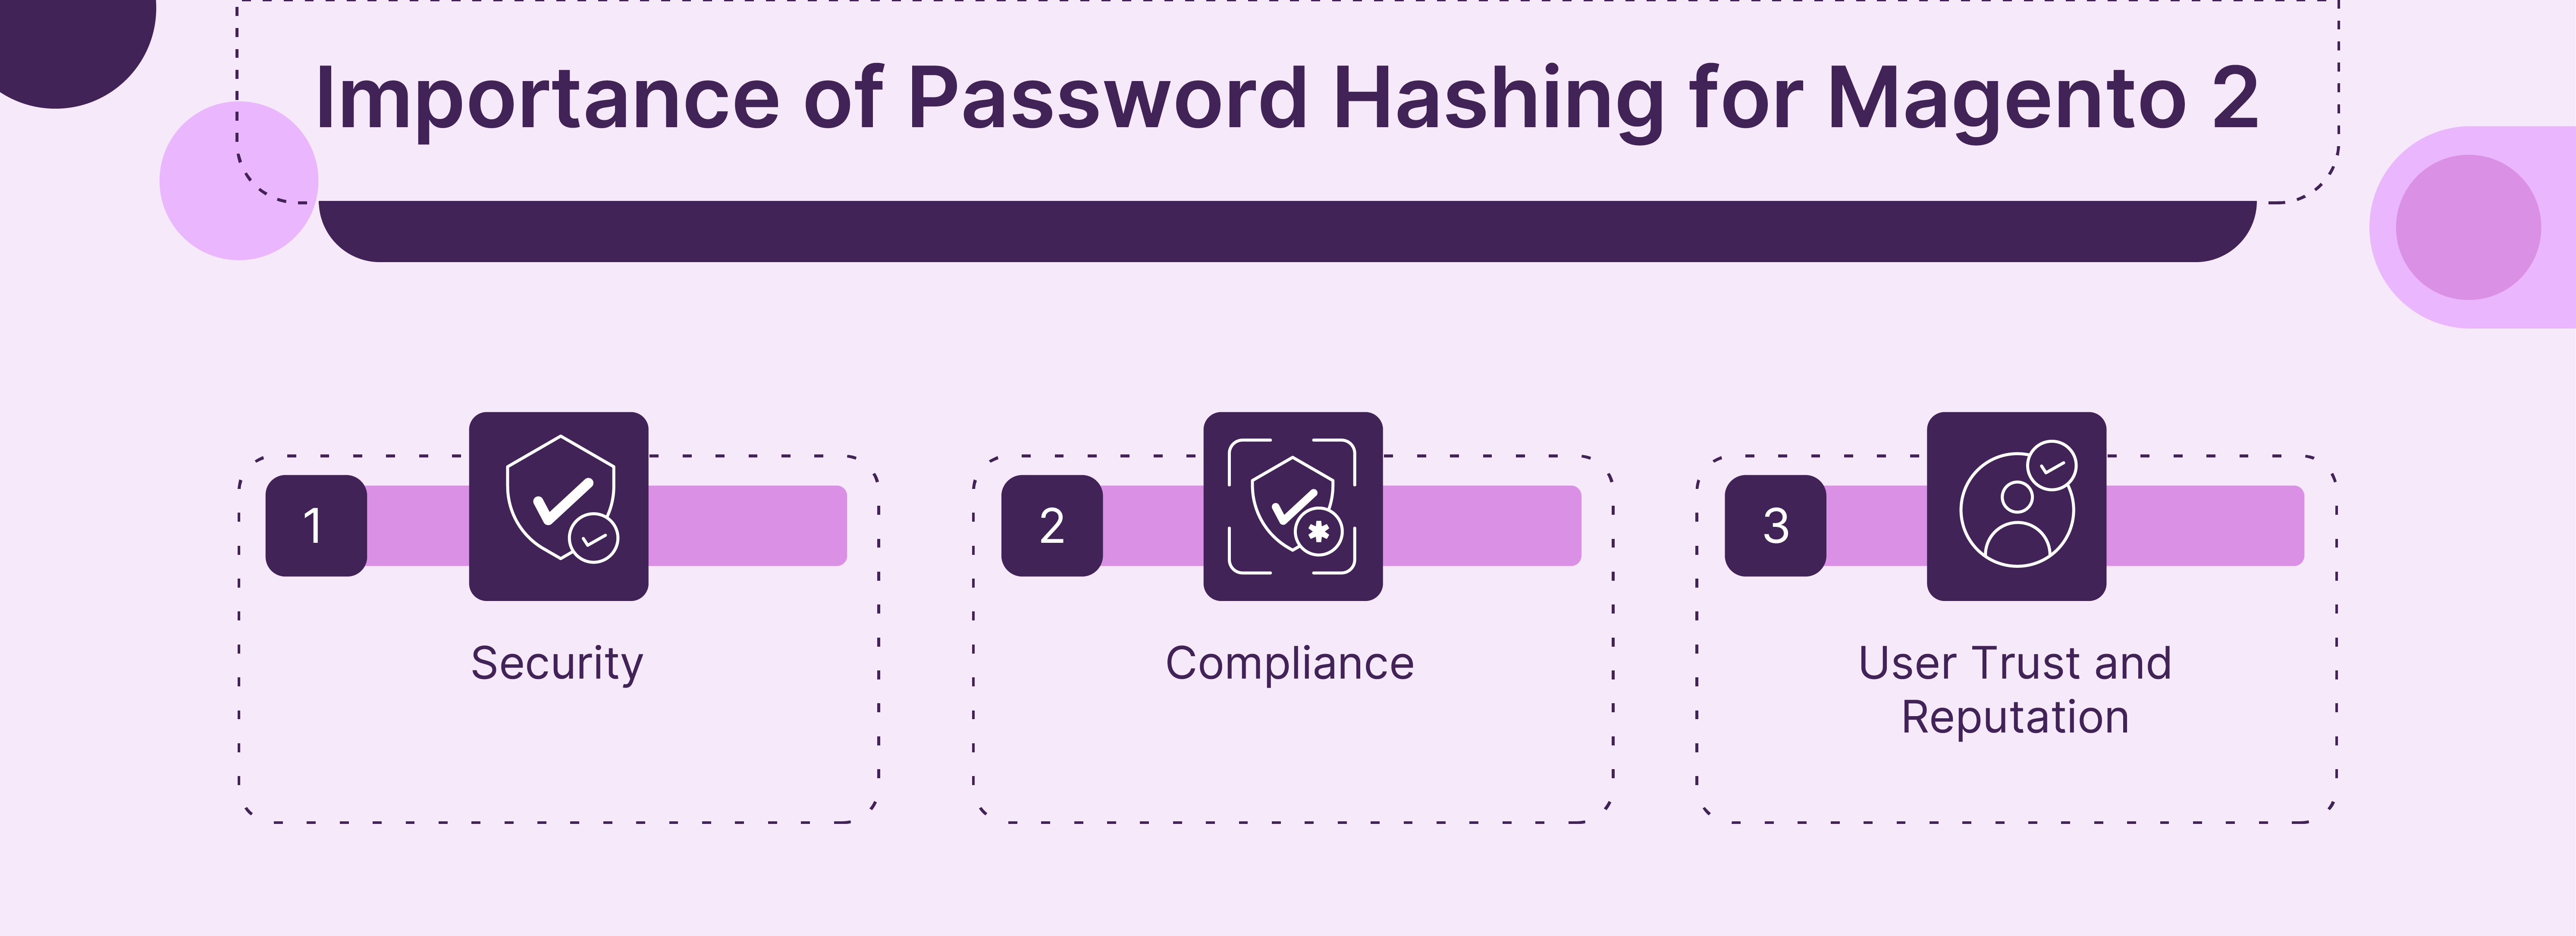 Importance of Password Hashing for Magento 2